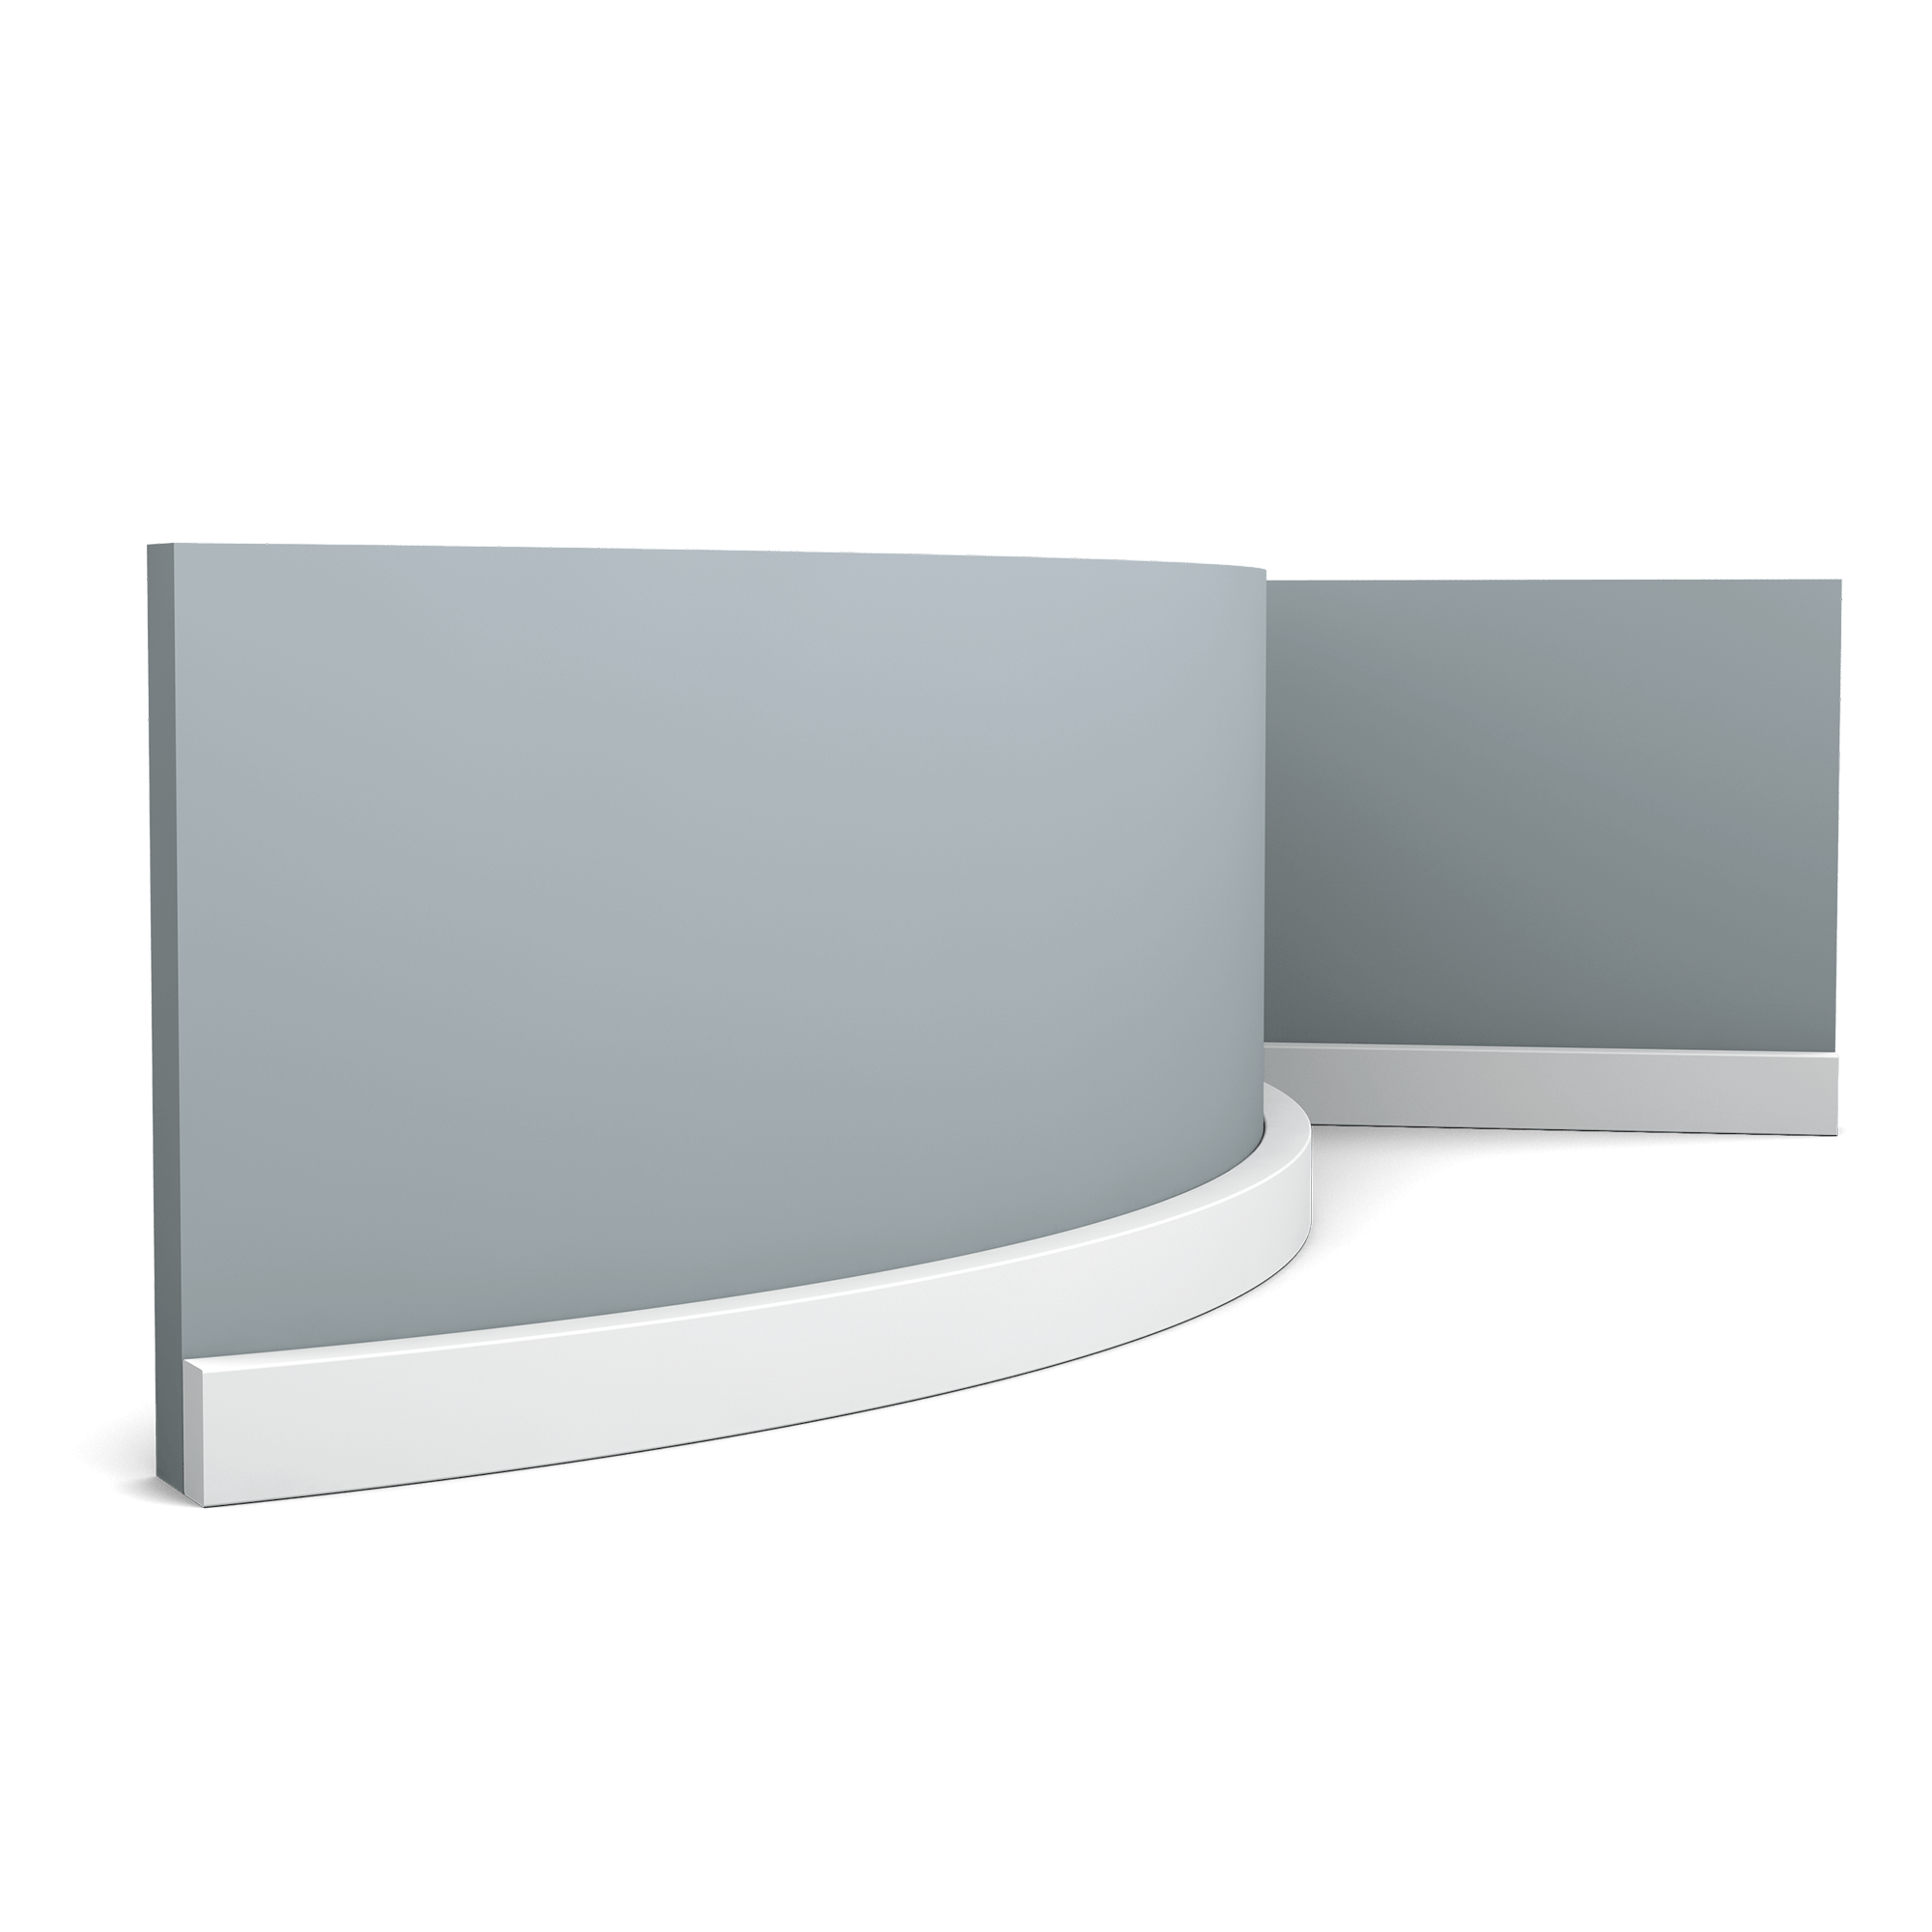 The flexible version of the SX194. The SX194 is our smallest and simplest profile and is part of the SQUARE family. This multifunctional profile can be used as panel moulding to finish a wainscoting or as a skirting board to create a subtle transition between floor and wall. Flex Radius: R min = 25 R* min = 80 cm